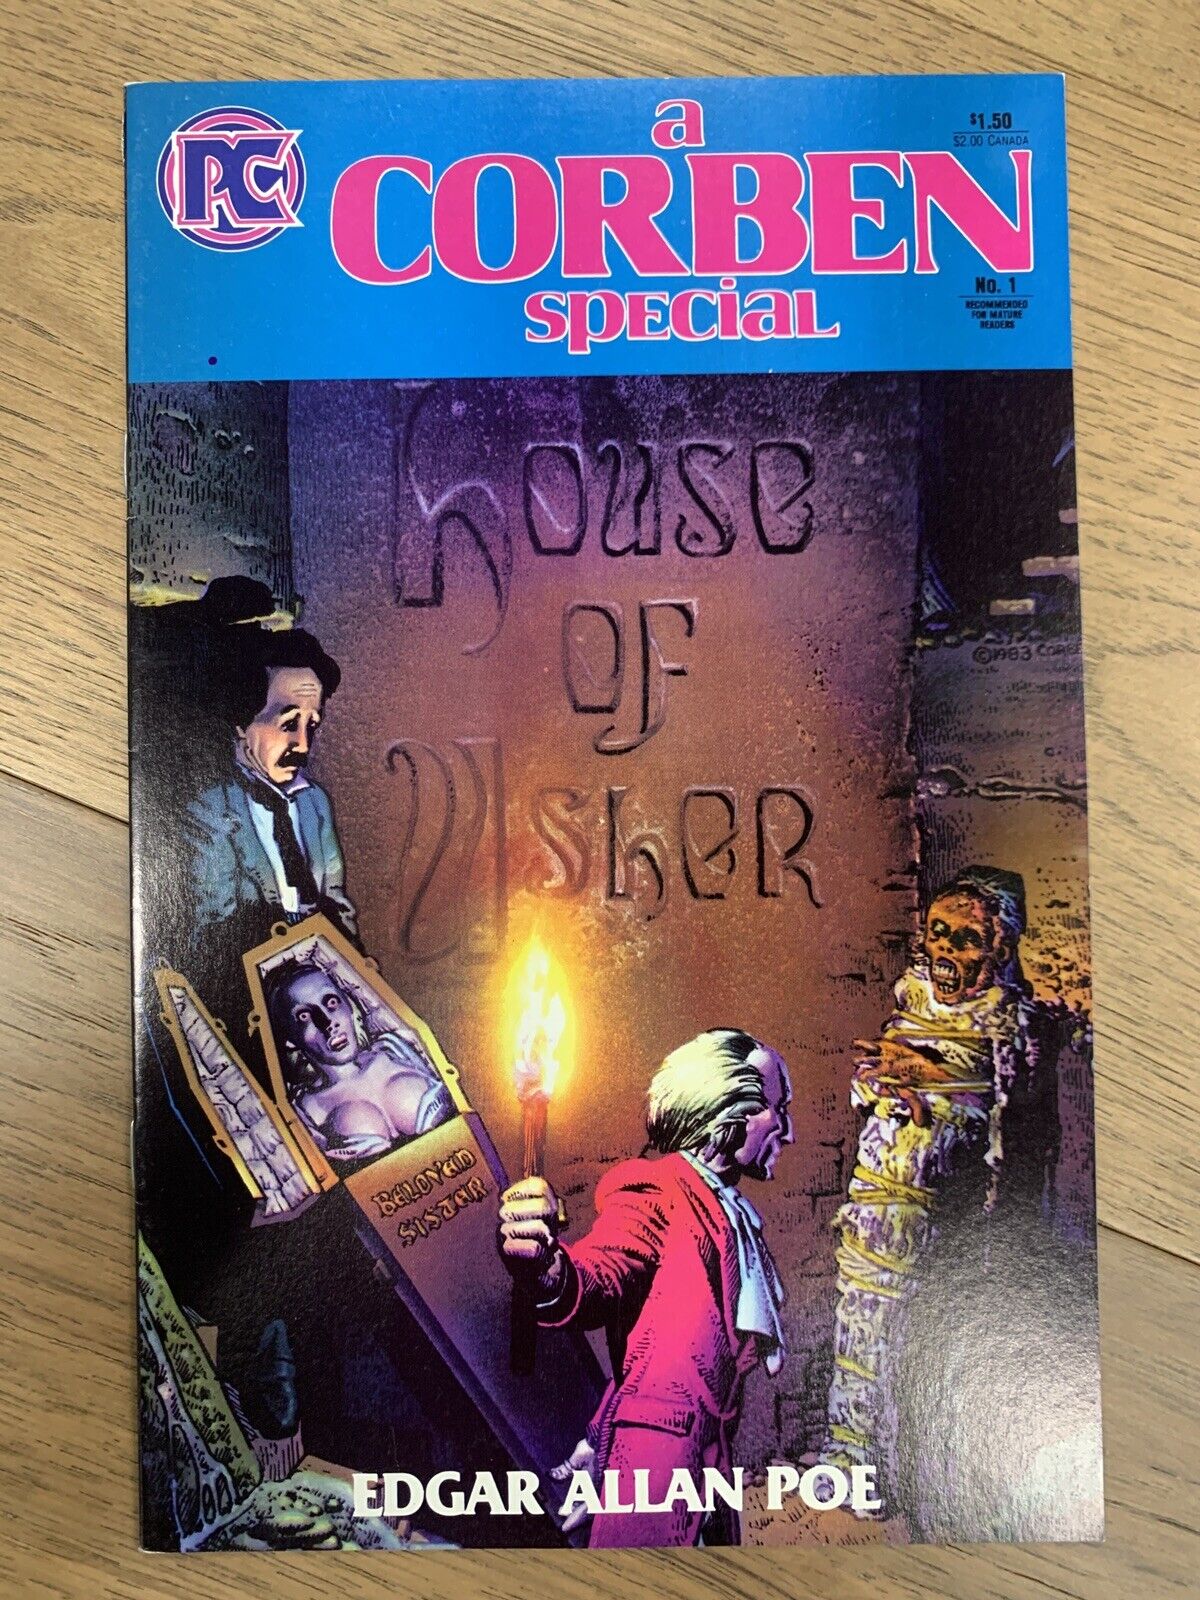 A Corben Special #1 (May, ‘84) - Fall of the House of Usher *GREAT-LOOKING BOOK*